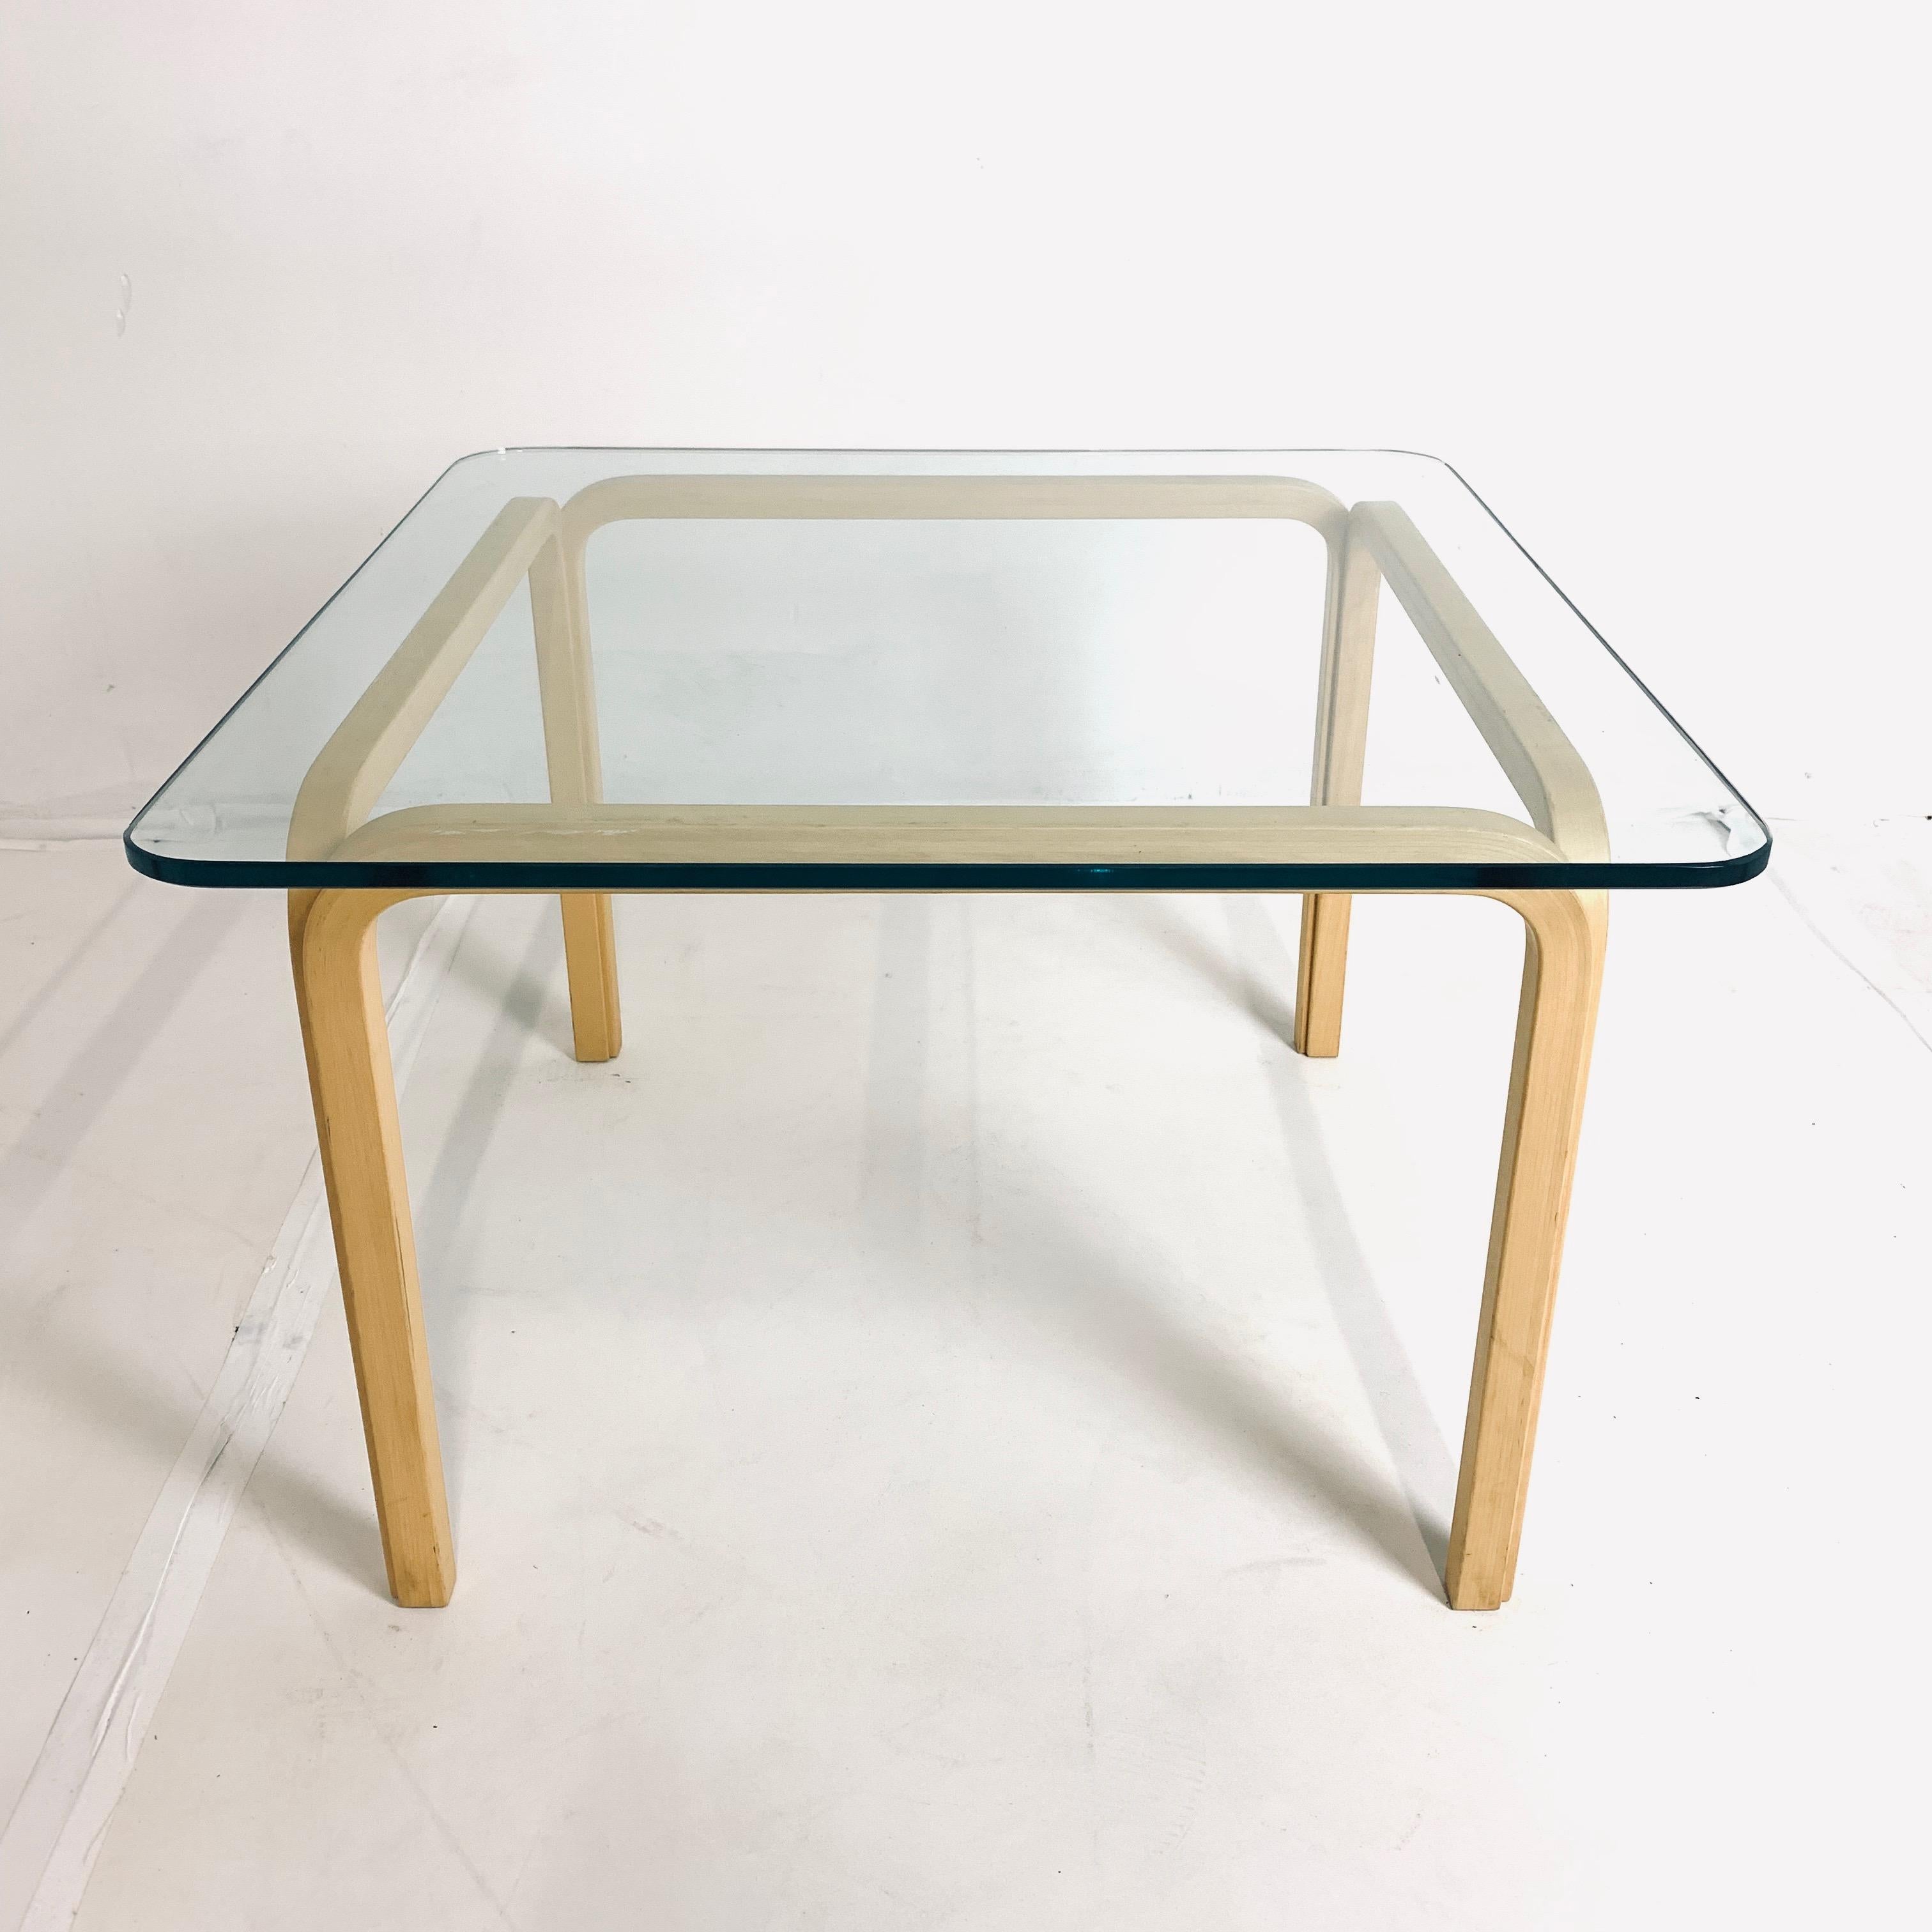 Alvar Aalto Artek Y805 Glass and Bentwood Birch Coffee or Cocktail Table 1